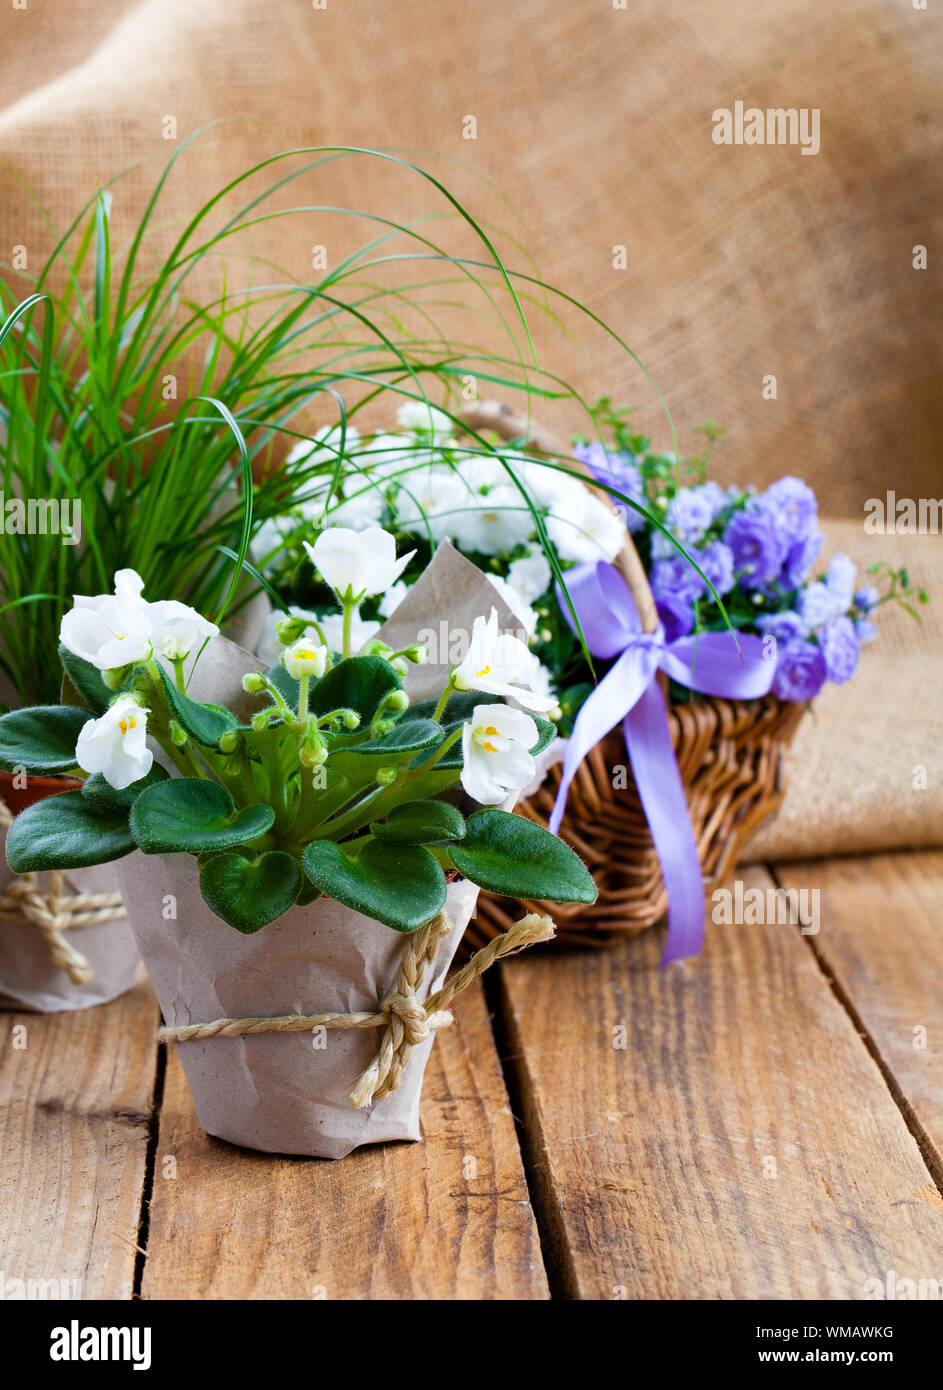 blue and white Campanula terry flowers, and white Saintpaulias flowers in paper packaging, on sackcloth wooden background Stock Photo